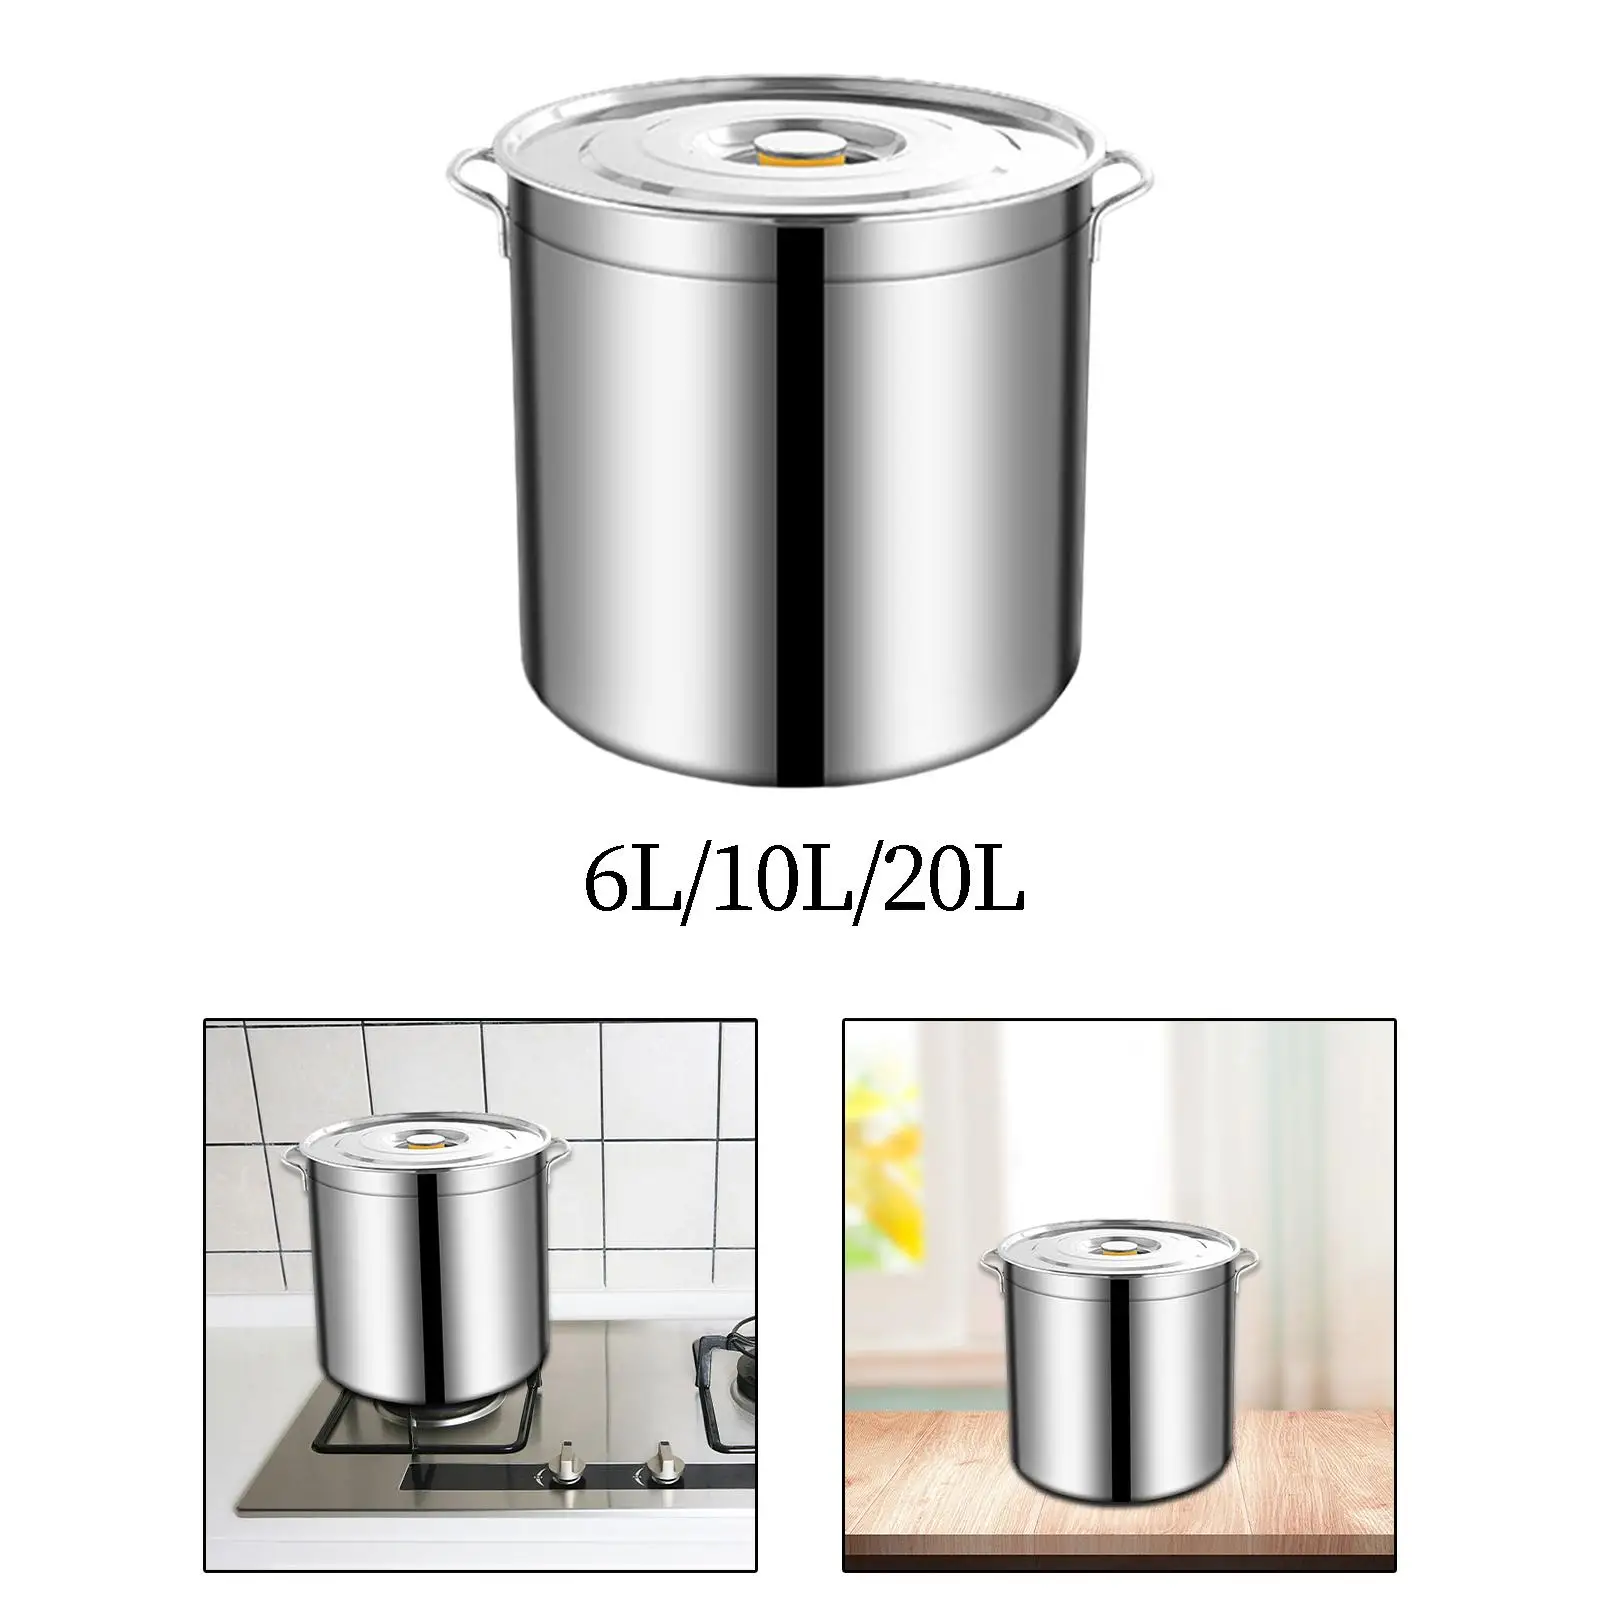 Stainless Steel Stockpot Oil Bucket for Boiling Strew Simmer Heavy Duty Large Soup Pot for Hotel Household Commercial Canteens